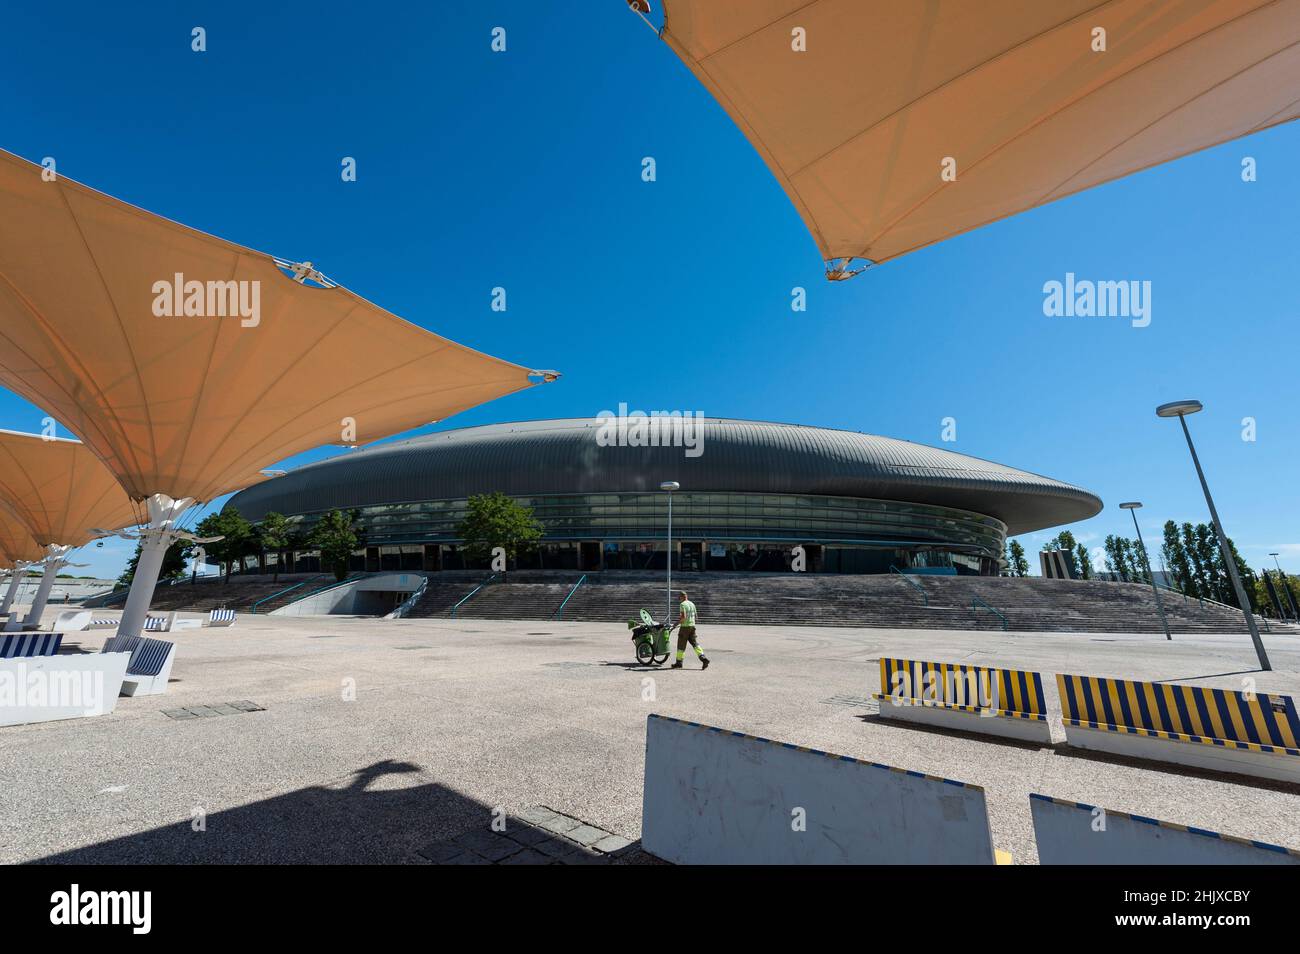 Altice Arena (formerly MEO Arena; also referred to by its original name, Pavilhão Atlântico), a multi-purpose indoor arena in Lisbon, Portugal. Stock Photo